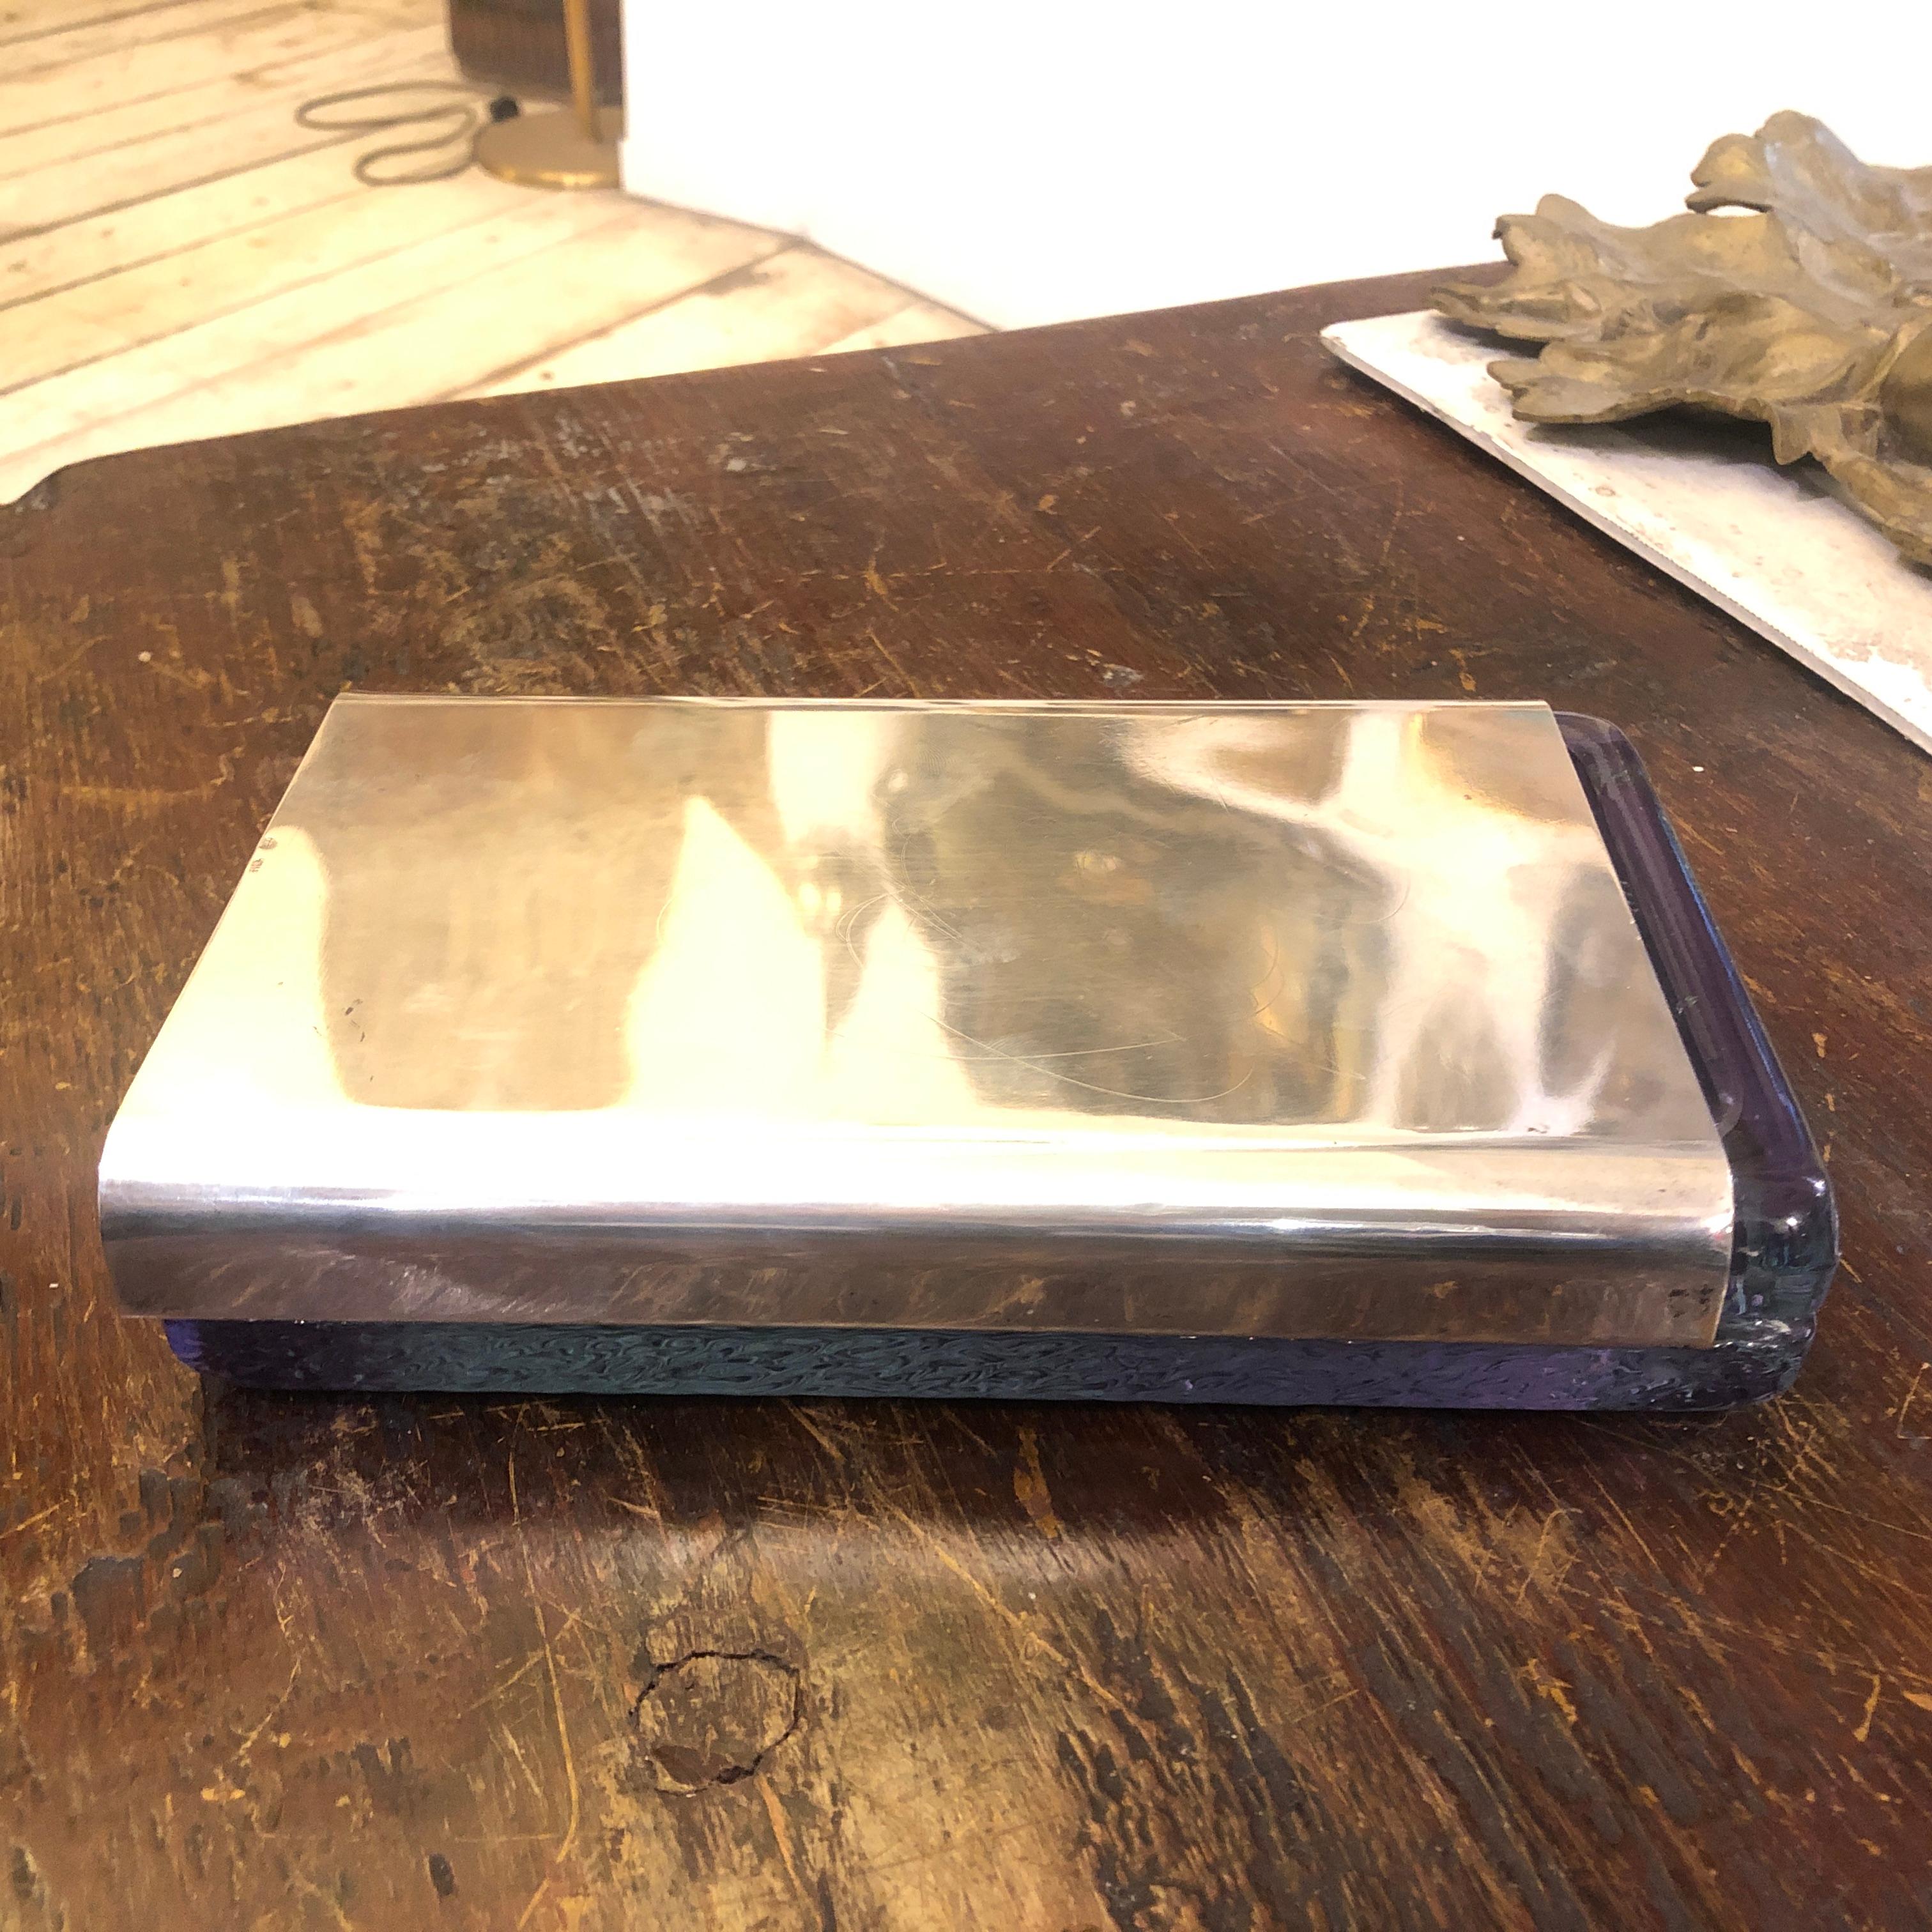 It's a crystal and silver cigarette box designed by Joe Colombo for Arnolfo di Cambio, it's a particular glass that change color with different light, Good conditions overall. There are two versions of this box, this one has a 800/1000 solid silver